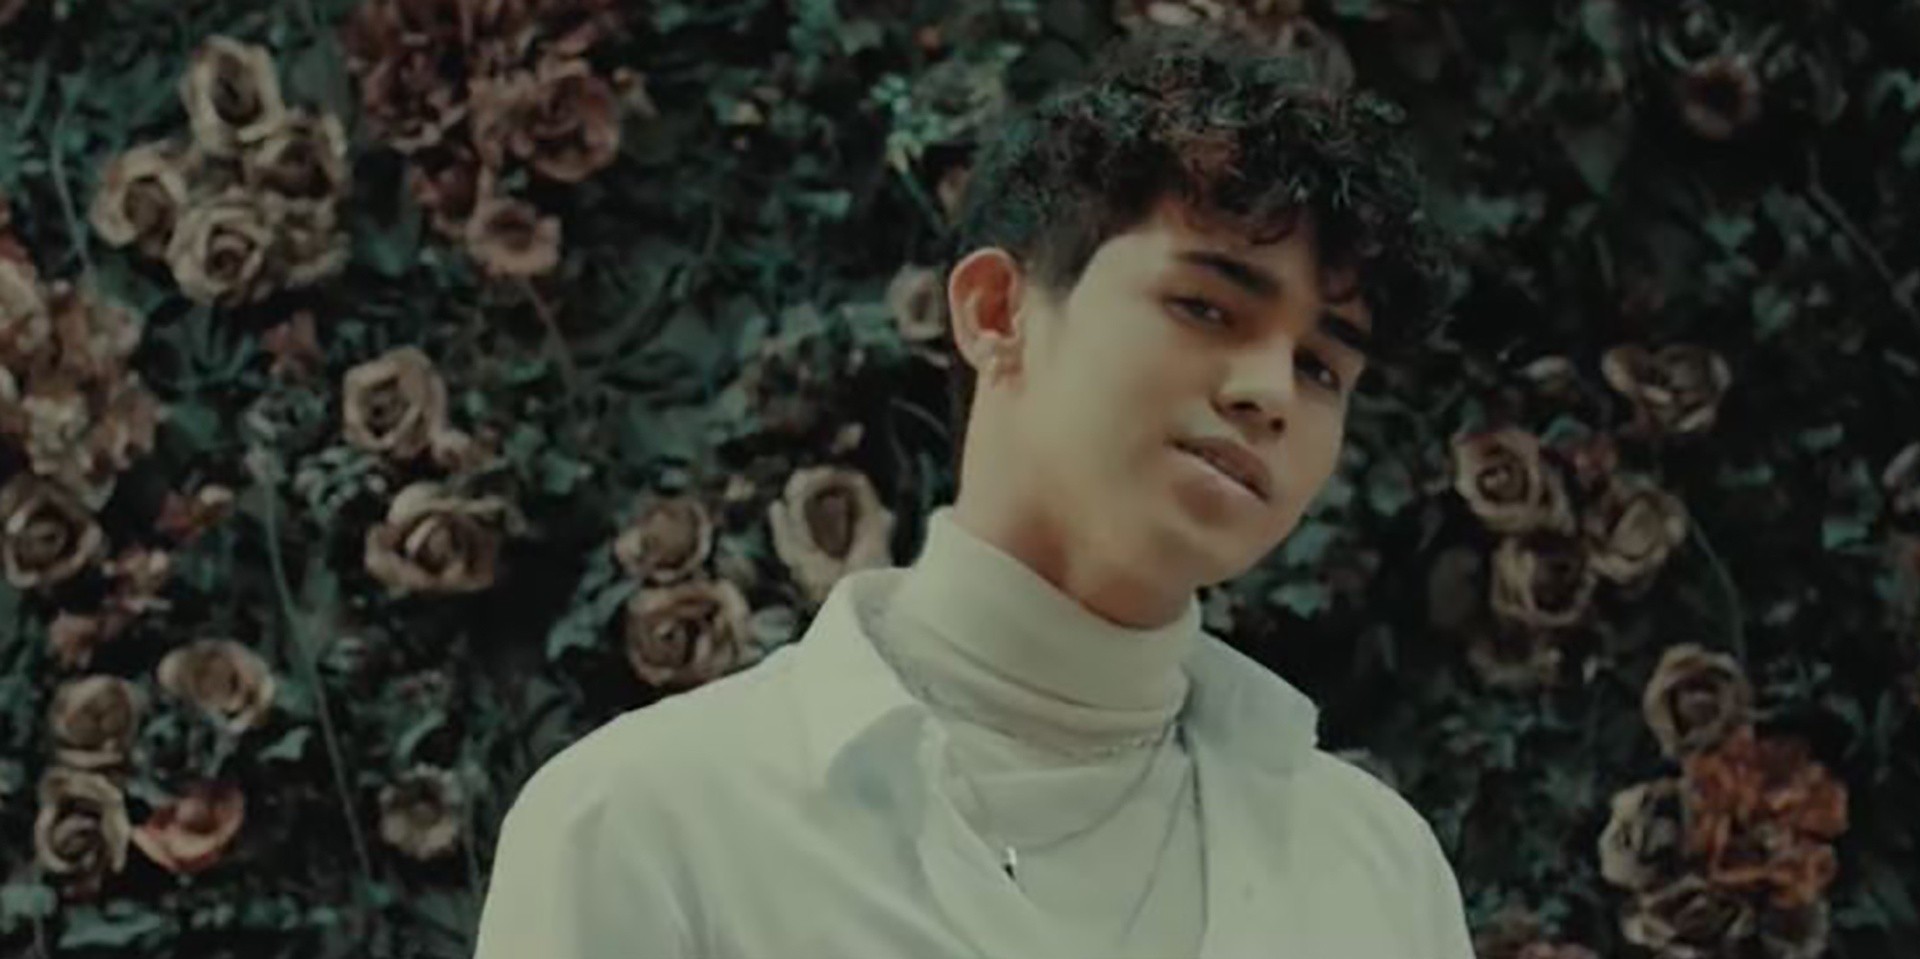 Iñigo Pascual and Moophs release 'Options' remix music video – watch